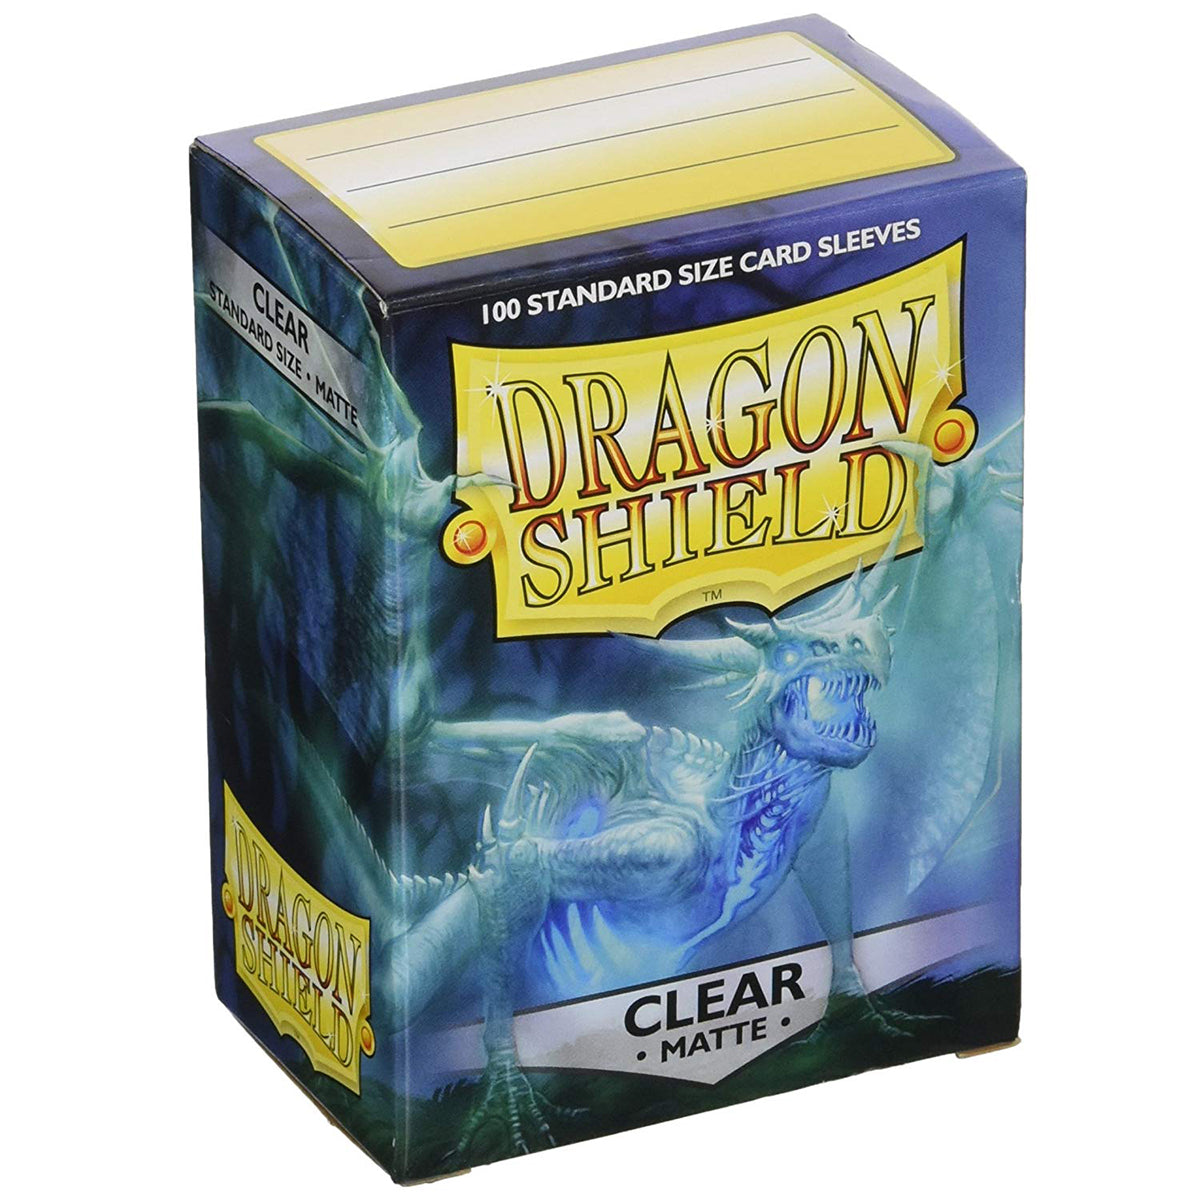 Dragon Shield Inner Sleeve Clear Standard Size 100 ct Card Sleeves  Individual Pack, 1 each - City Market